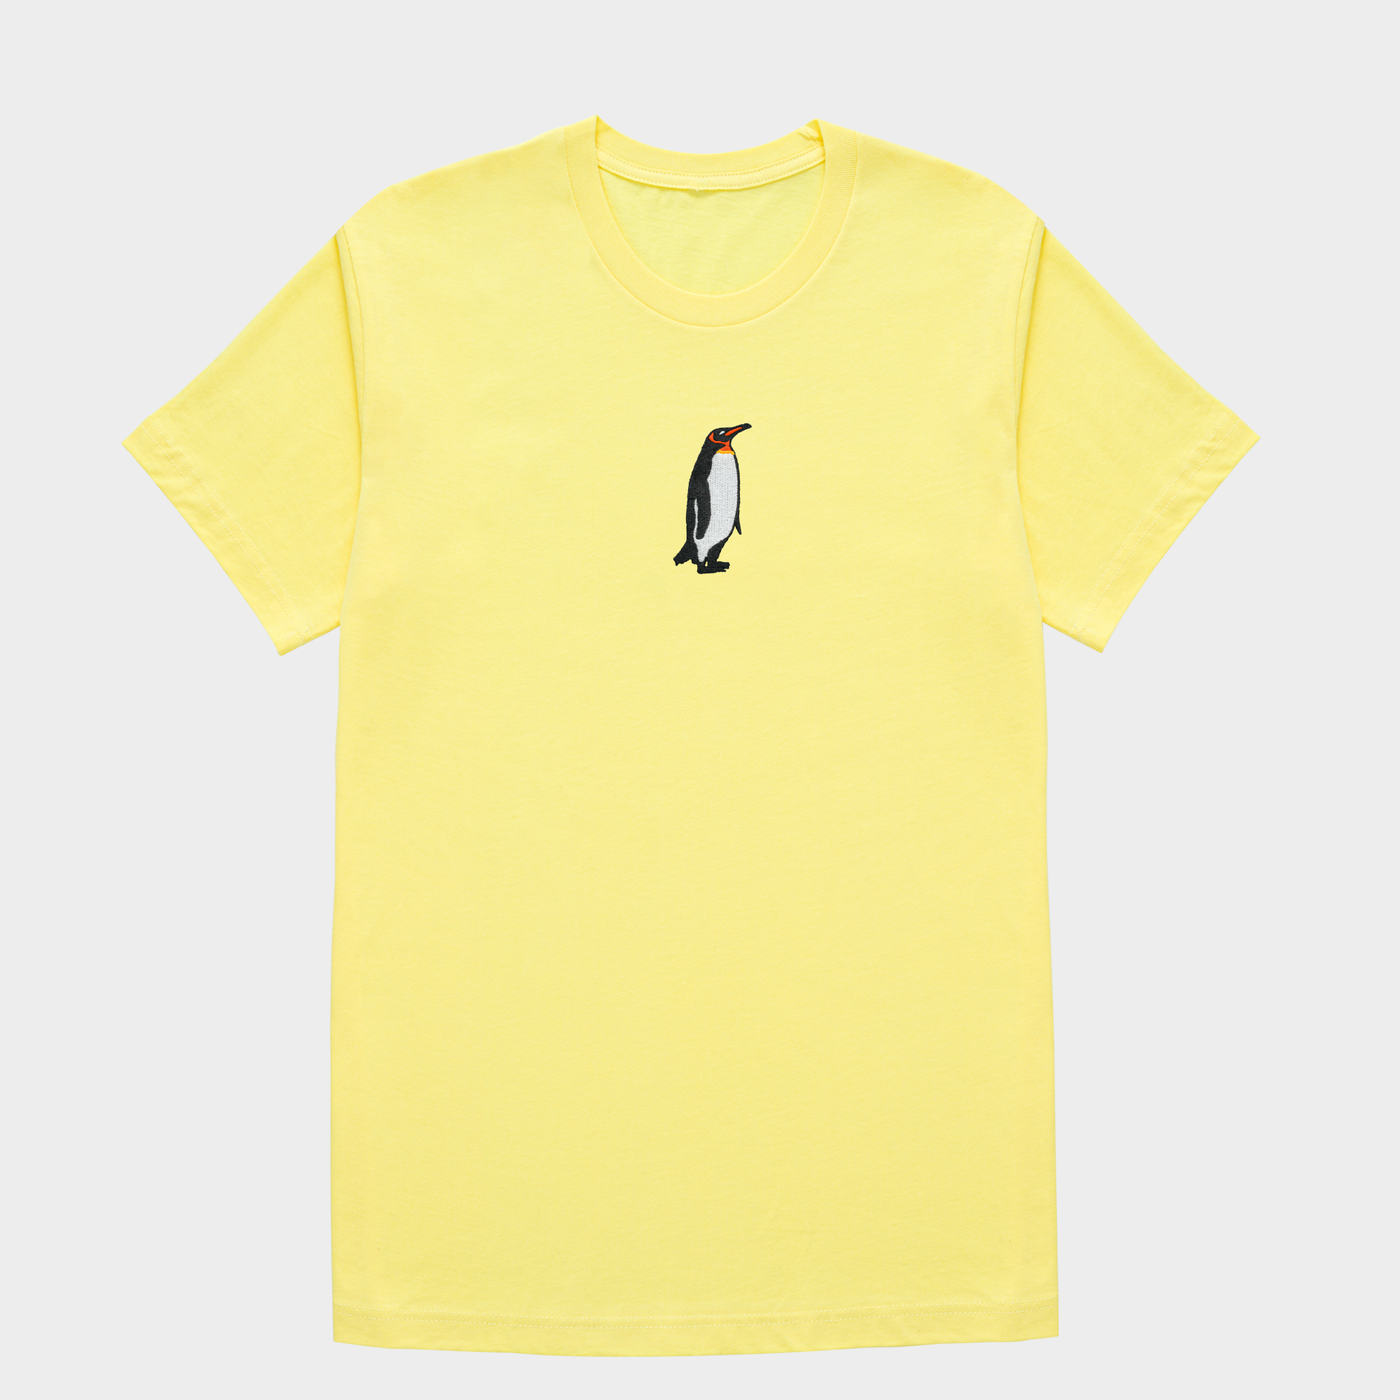 Bobby's Planet Men's Embroidered Penguin T-Shirt from Arctic Polar Animals Collection in Yellow Color#color_yellow